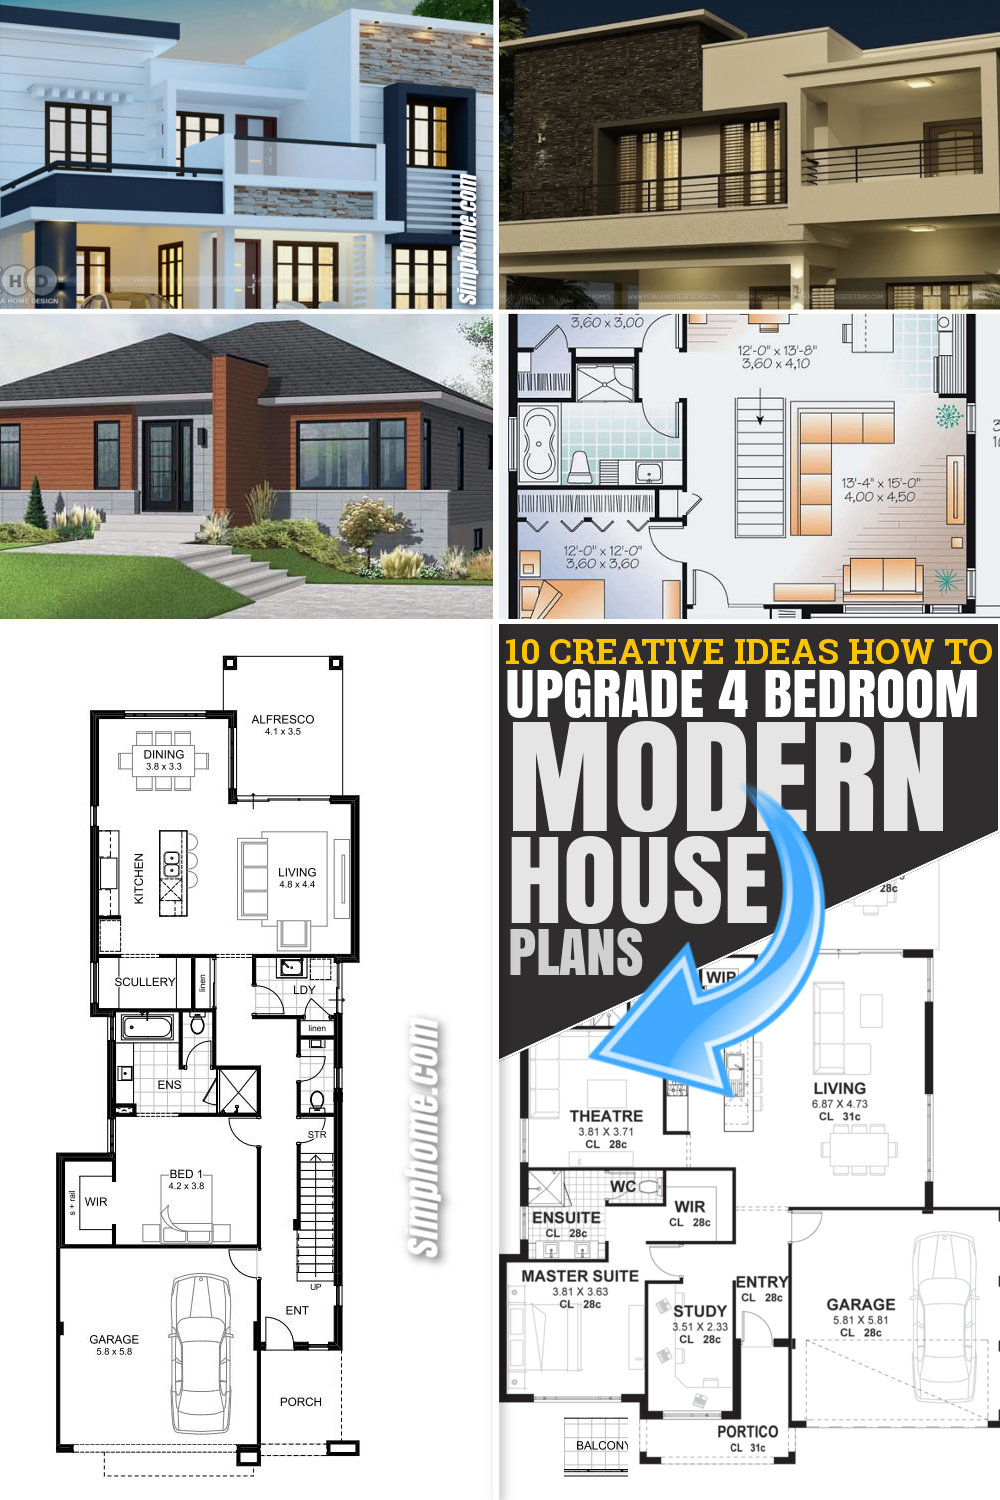 12 Cool Concepts Of How To Upgrade 4 Bedroom Modern House Plans Simphome,Light Grey Tile Living Room